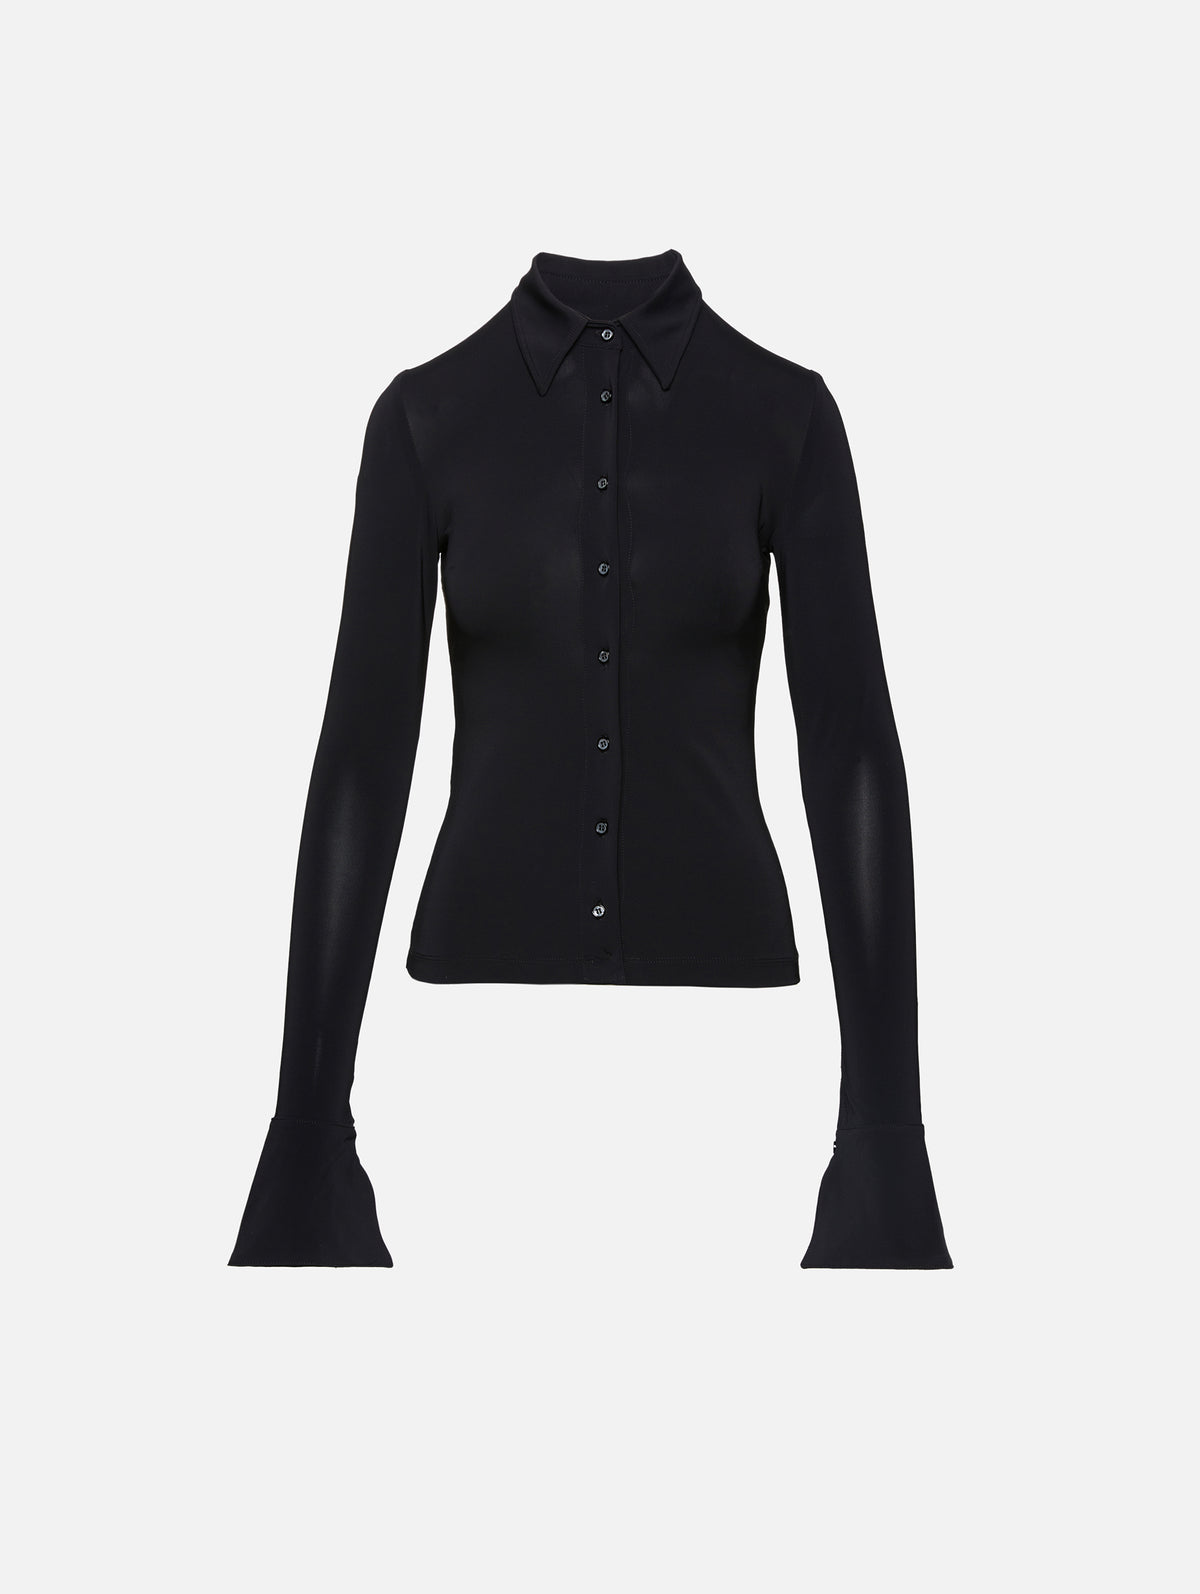 Eterne Cropped Long Sleeve Fitted Top in Black